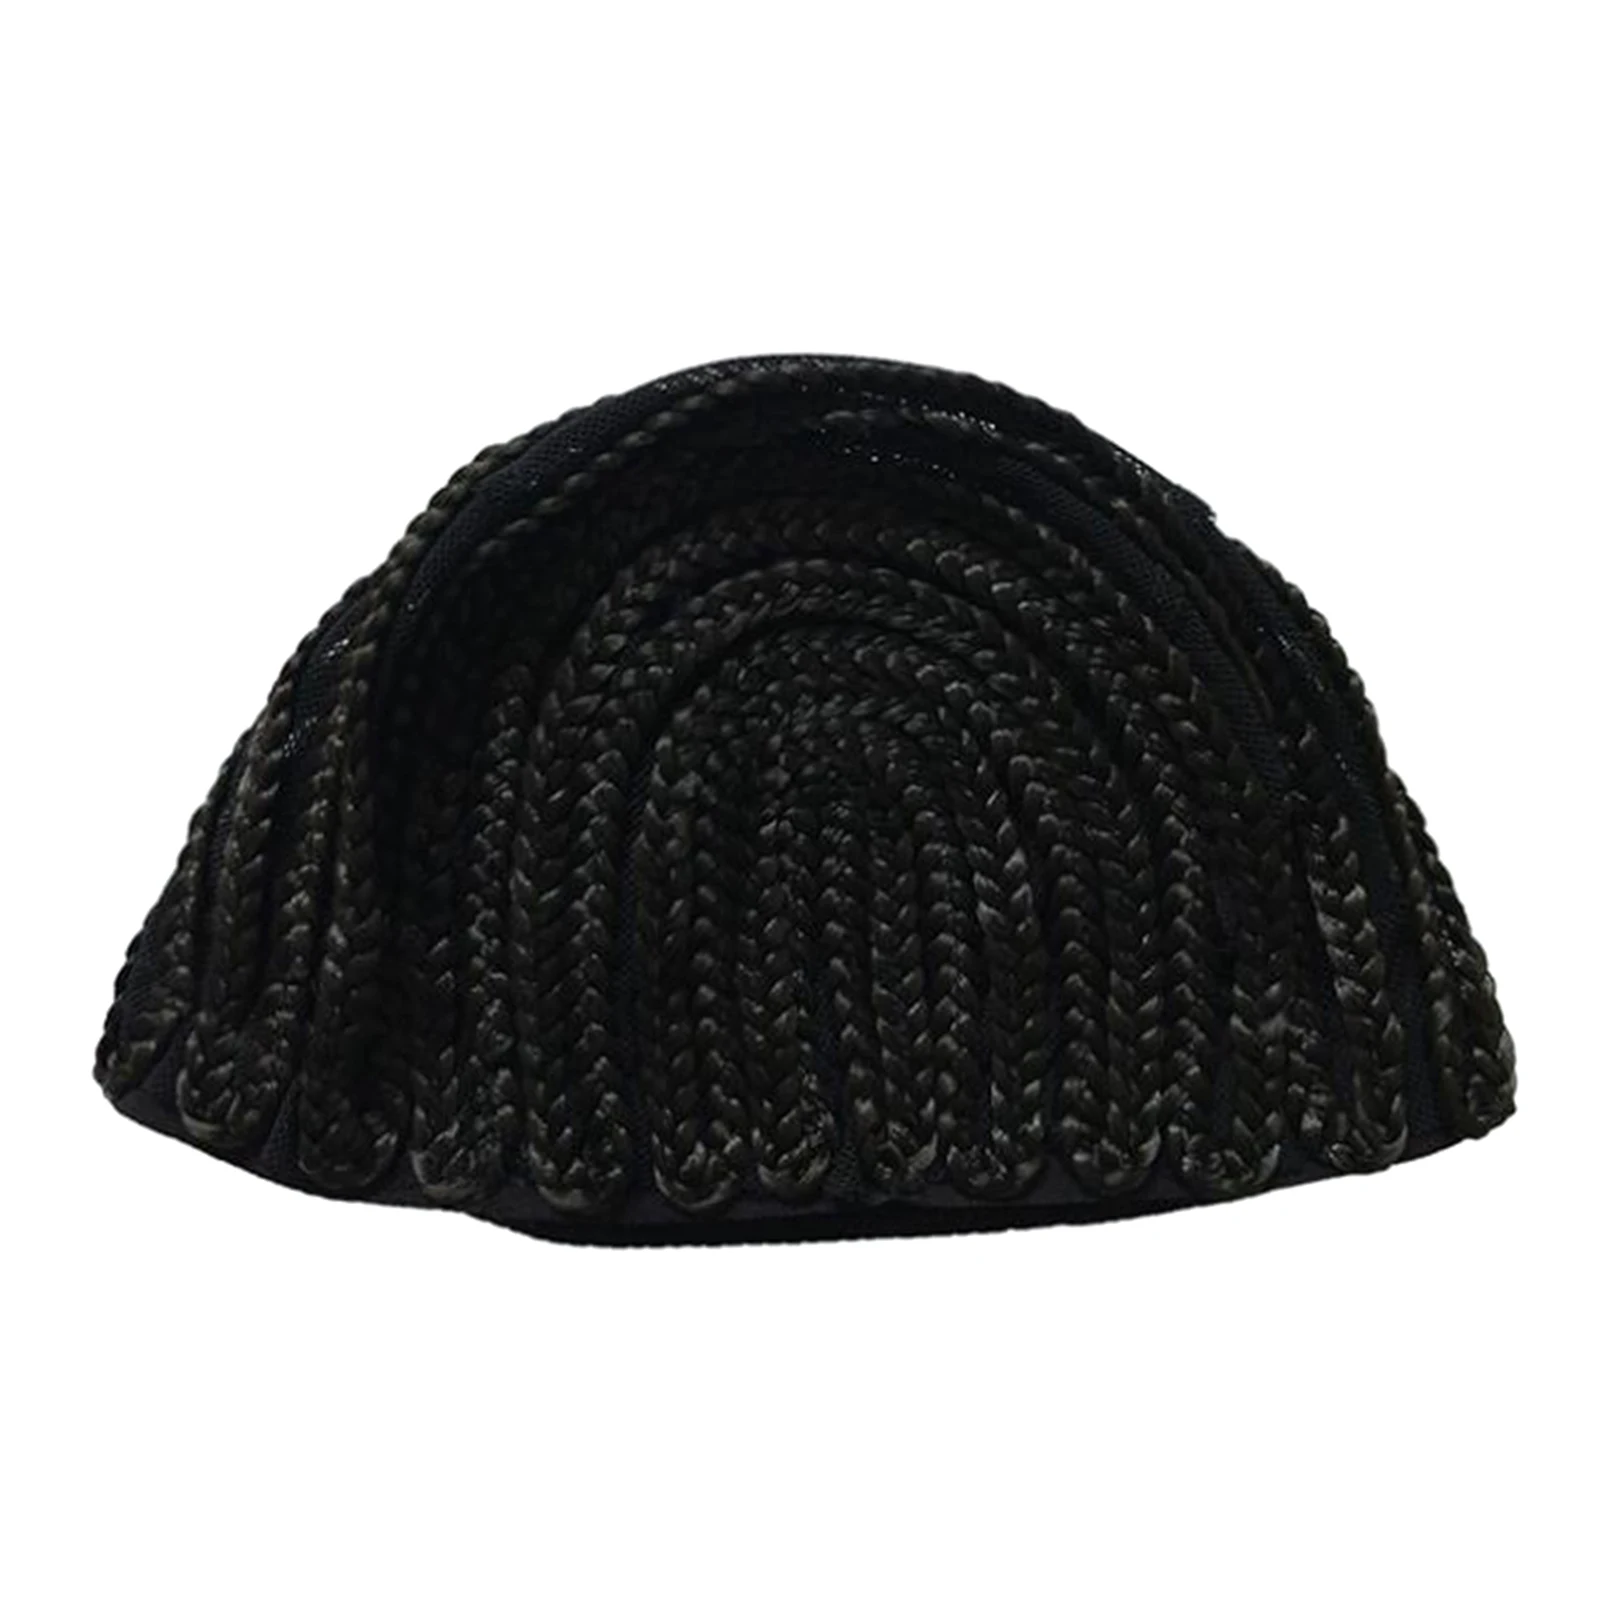 Adjustable Braided Wig Caps Durable Stable Black Braiding Wigs Cap Free Size, for Both Professional Use and Home Use